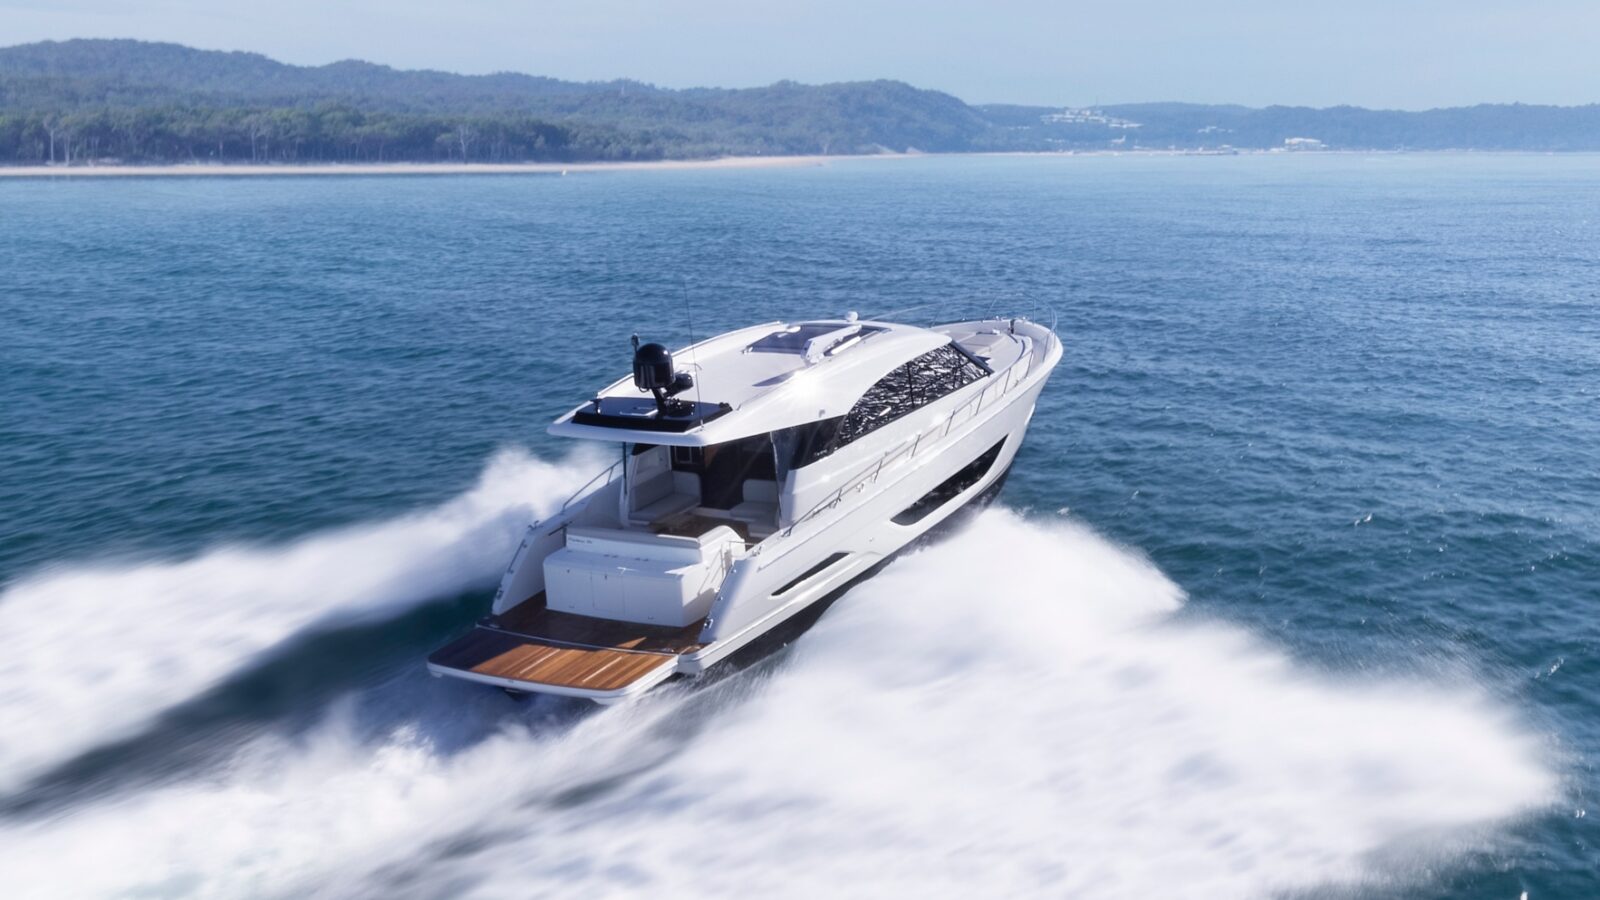 Maritimo to make American debut of two new models at Fort Lauderdale International Boat Show